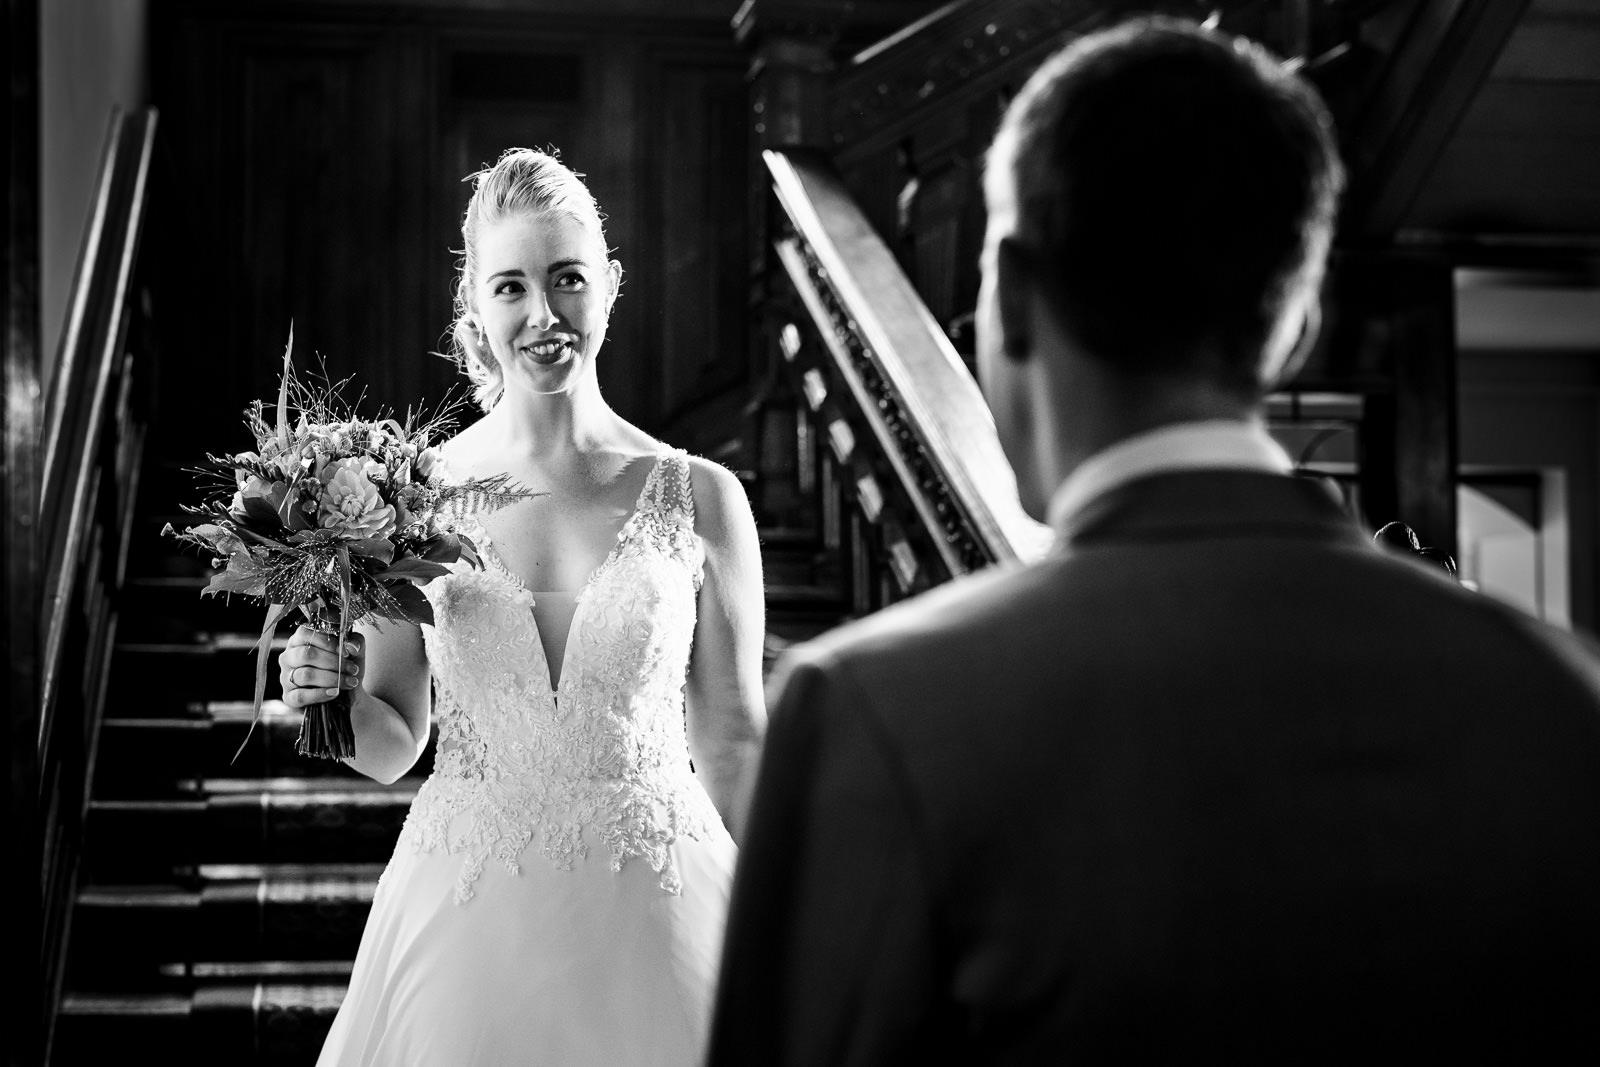 Firstlook moment bride and groom by wedding photographer The Hague